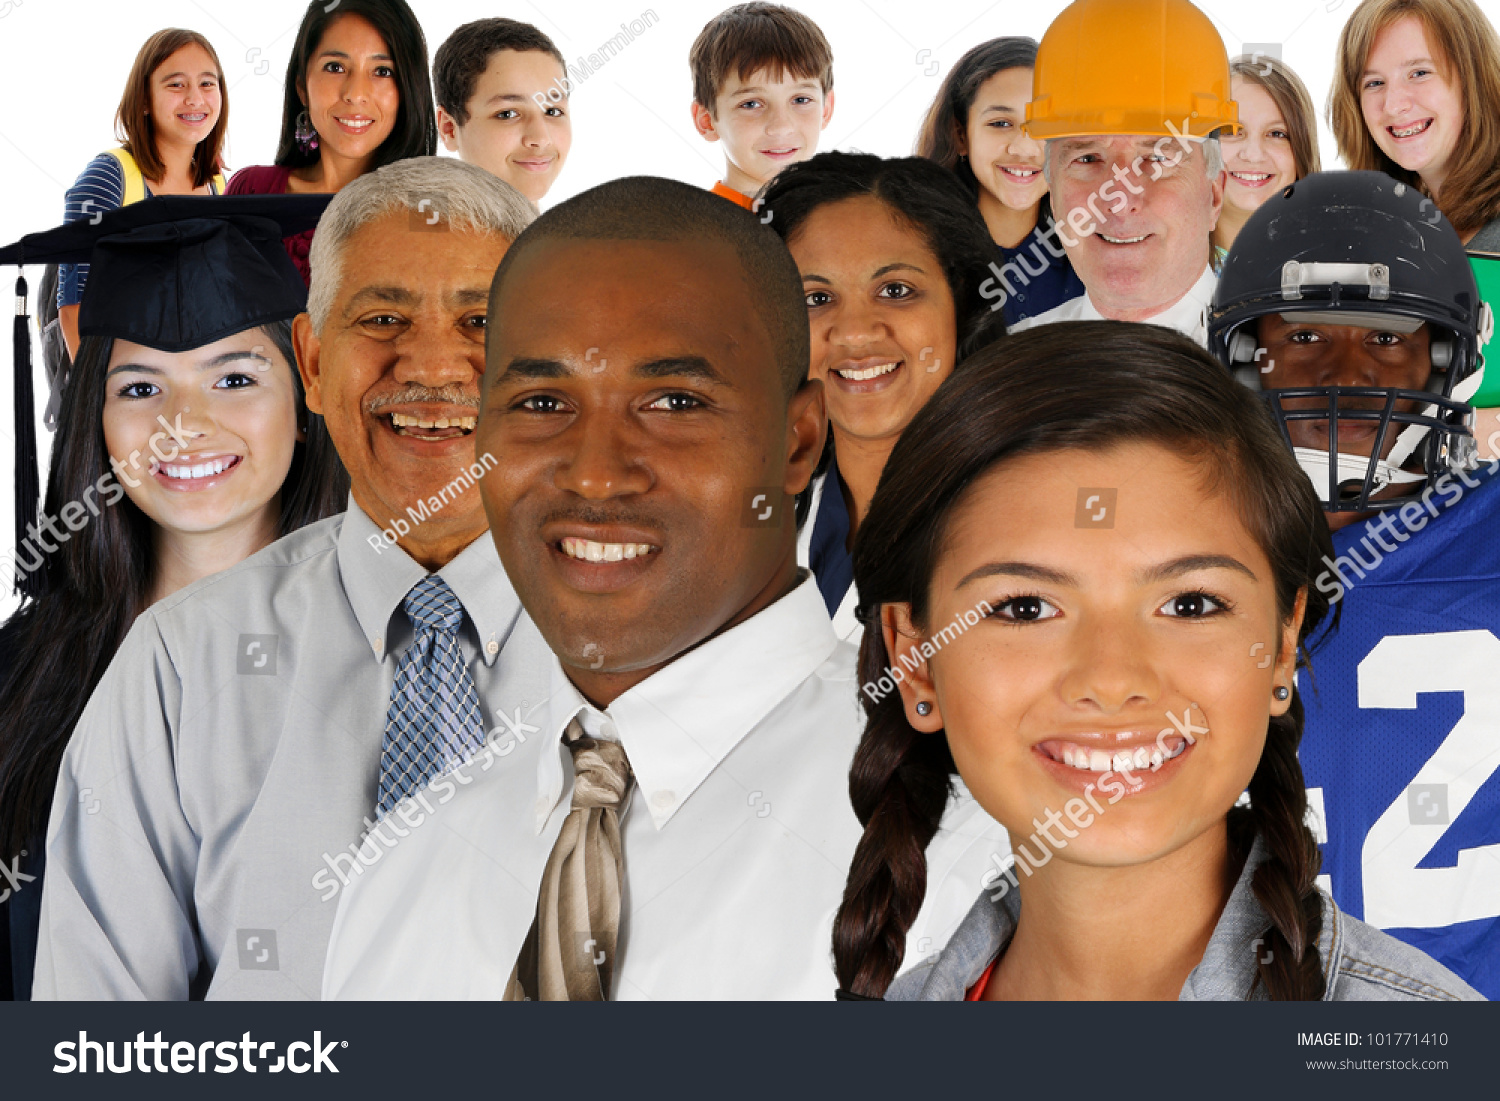 People Of All Different Races And Professions Stock Photo 101771410 